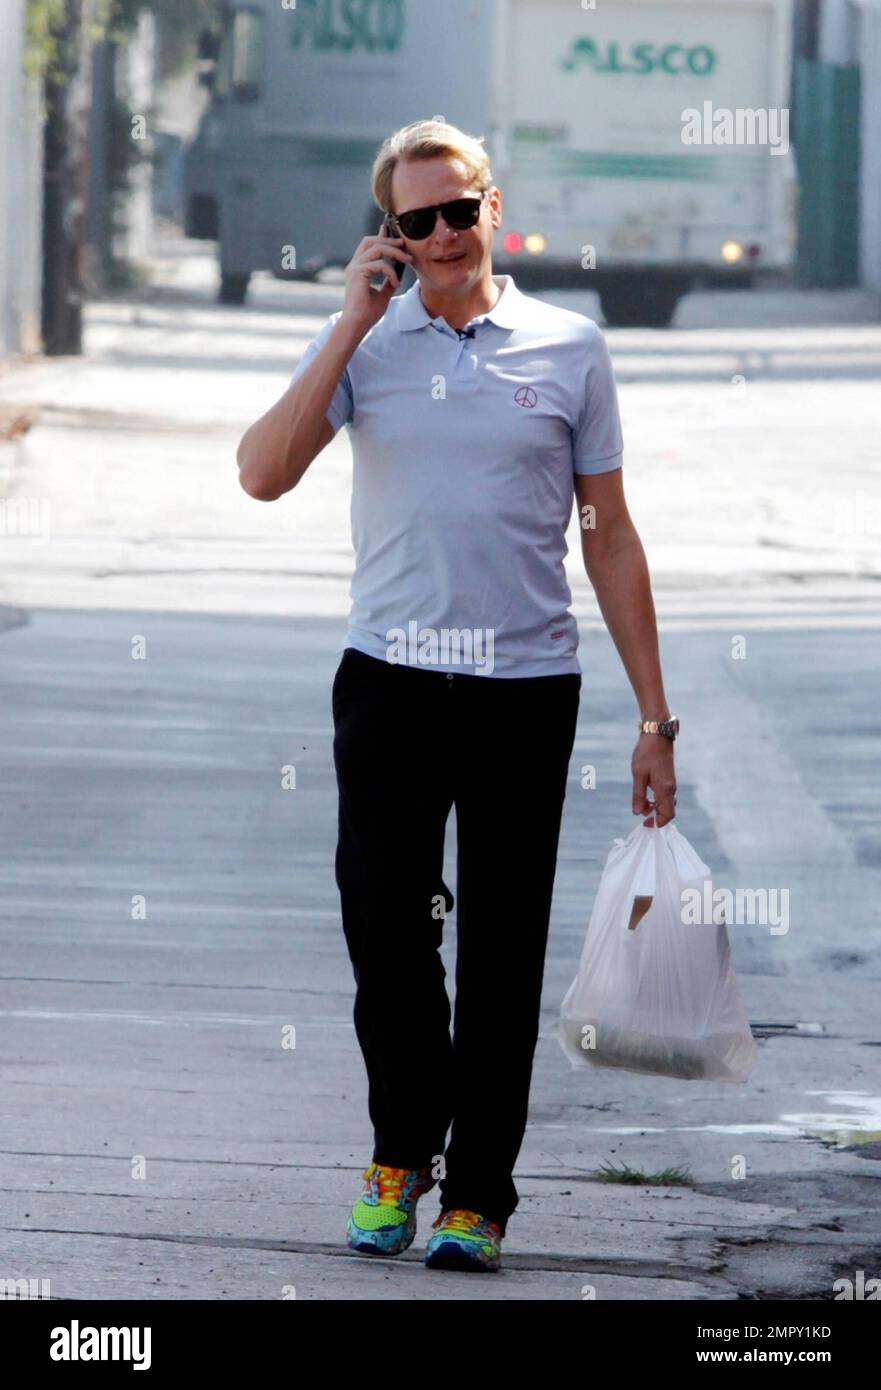 Carson Kressley wears some wild multi-colored neon sneakers and what looks like a kind of compression garment as he leaves the 'Dancing With The Stars' rehearsal studio in Hollywood, CA. 28th September 2011. Stock Photo